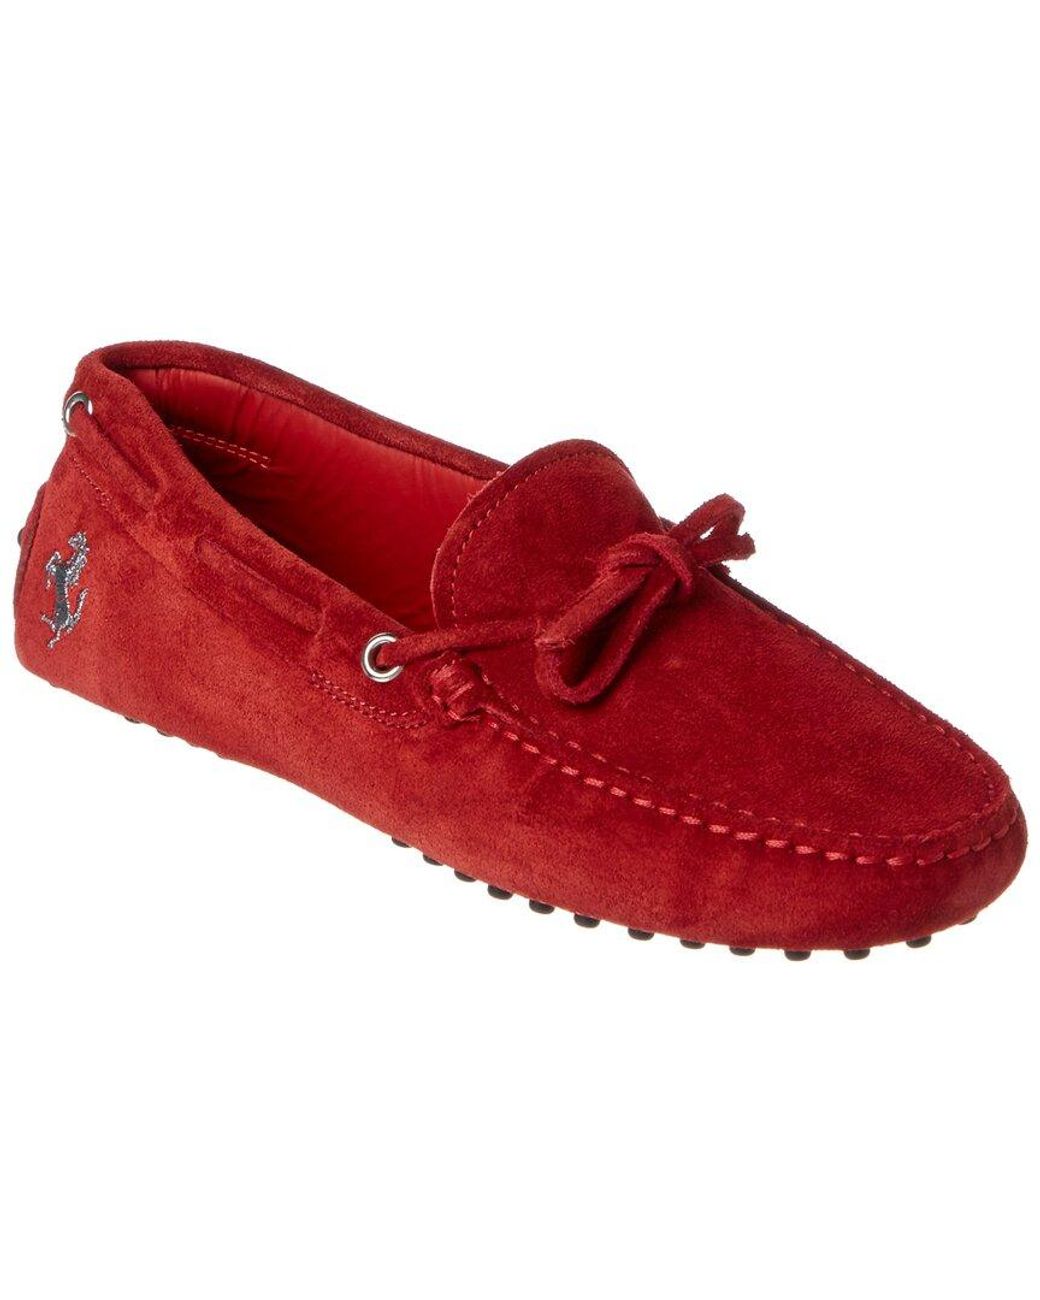 Tod's Ferrari Gommino Suede Driving Shoe in Red | Lyst